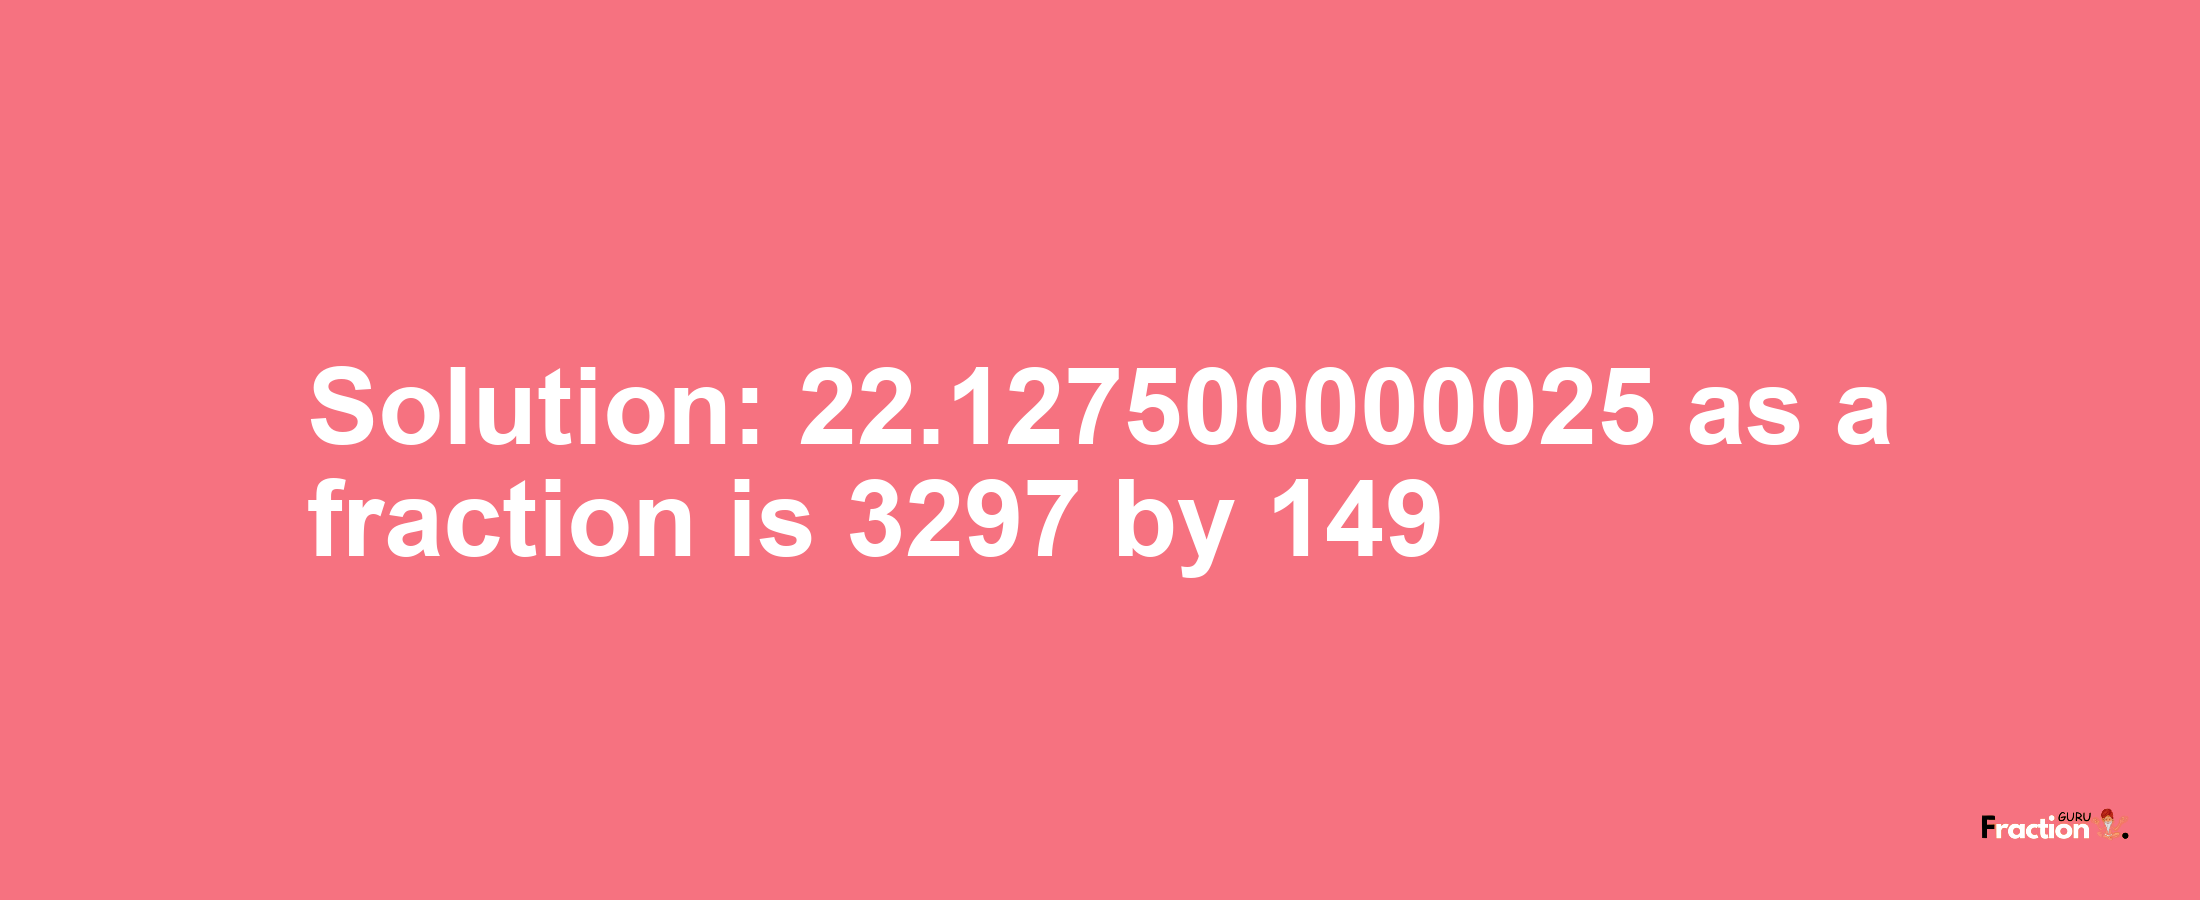 Solution:22.127500000025 as a fraction is 3297/149